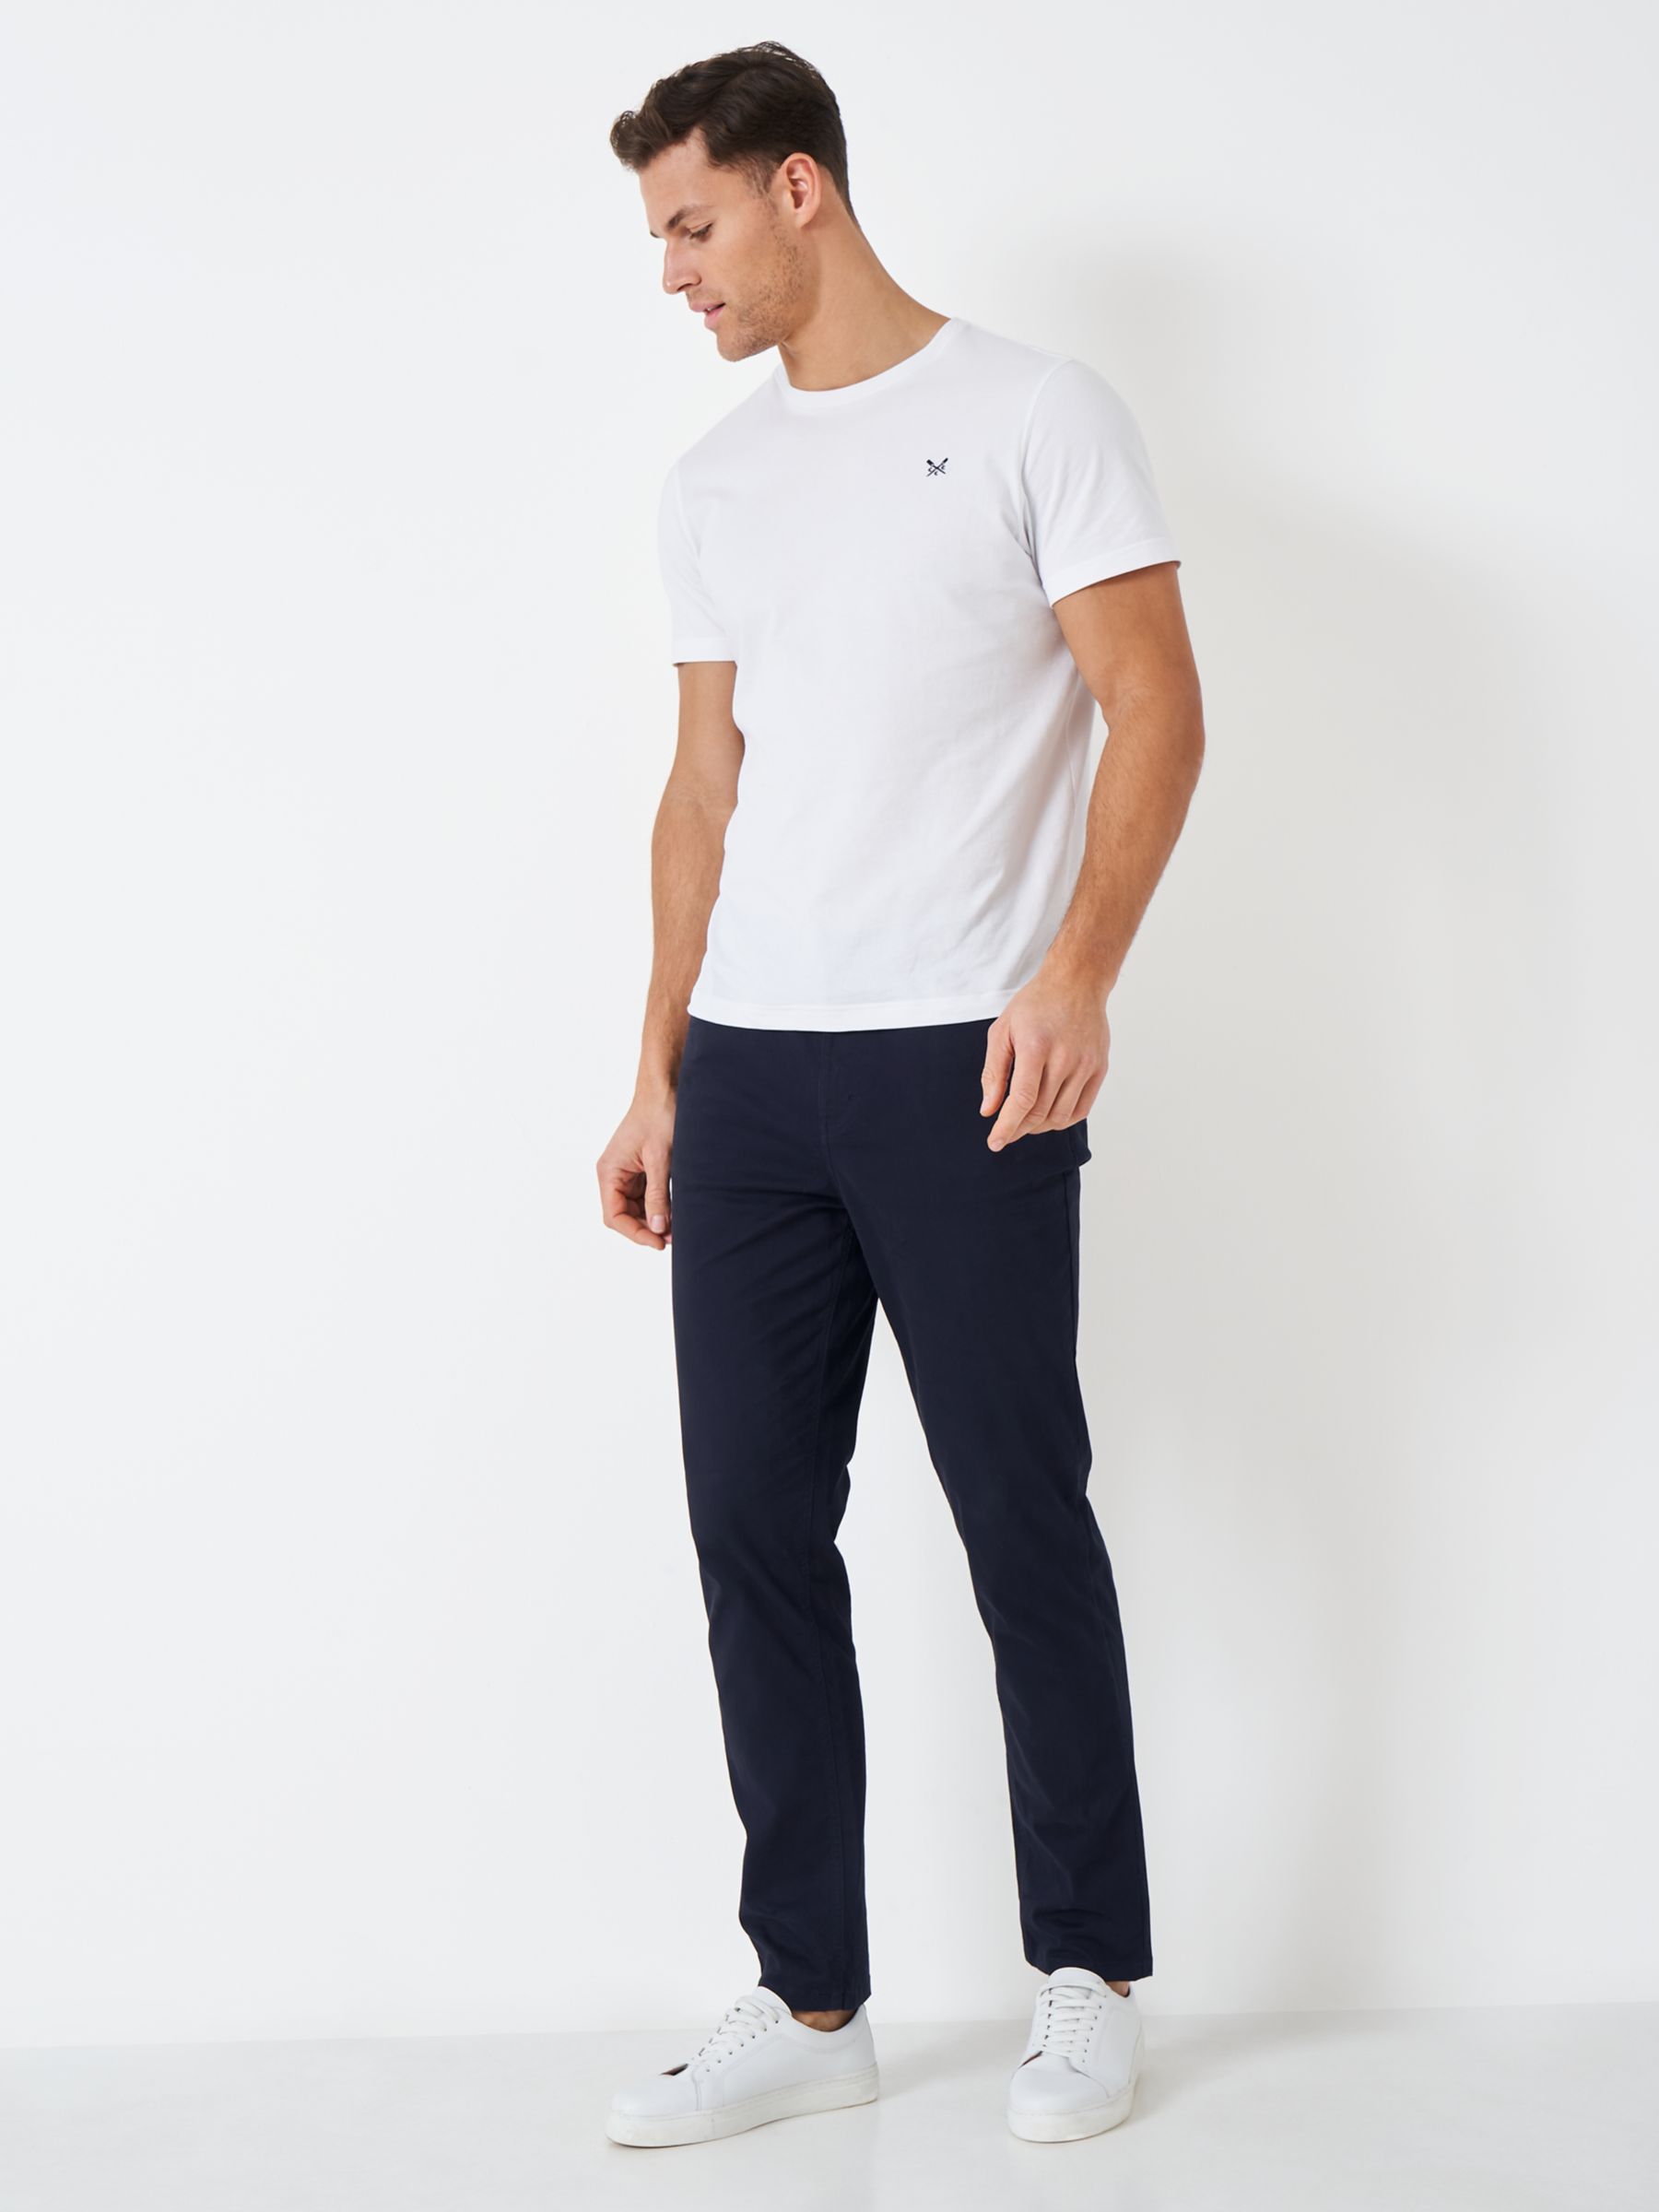 Crew Clothing Spencer Slim Fit Trousers, Navy, 32S